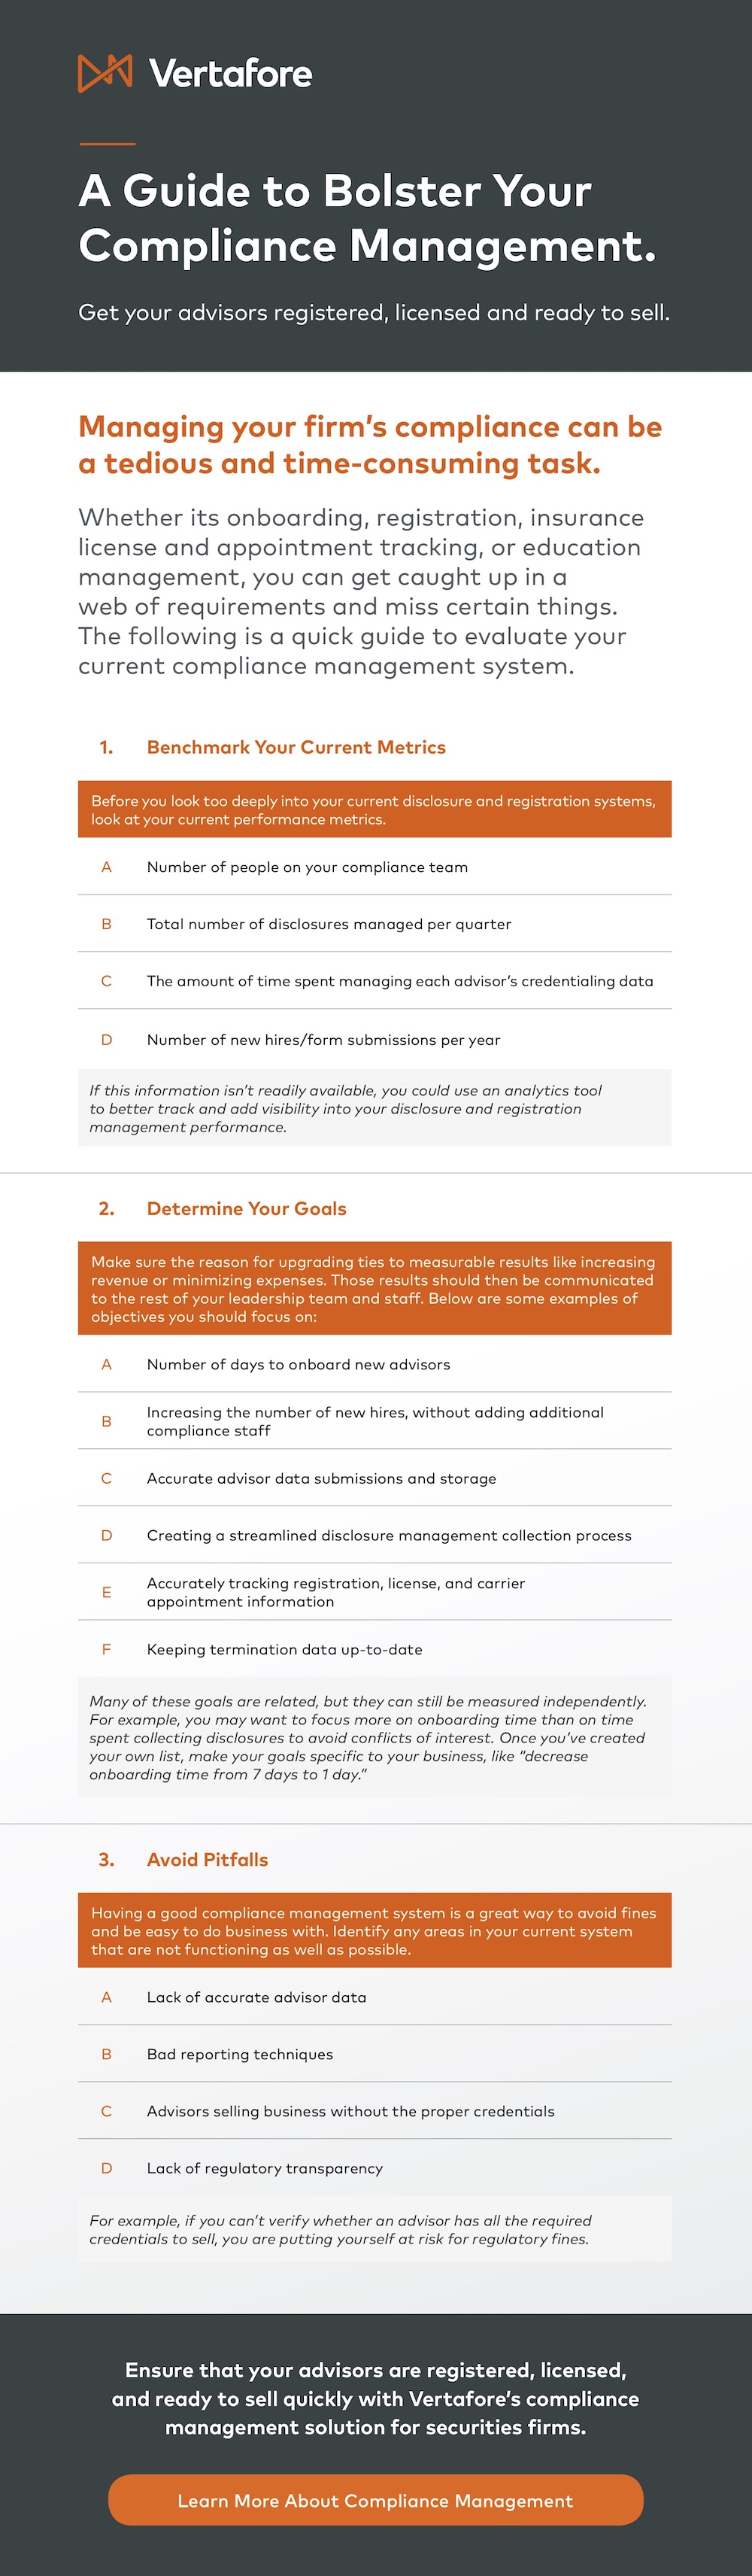 A Guide to Bolster Your Compliance Management